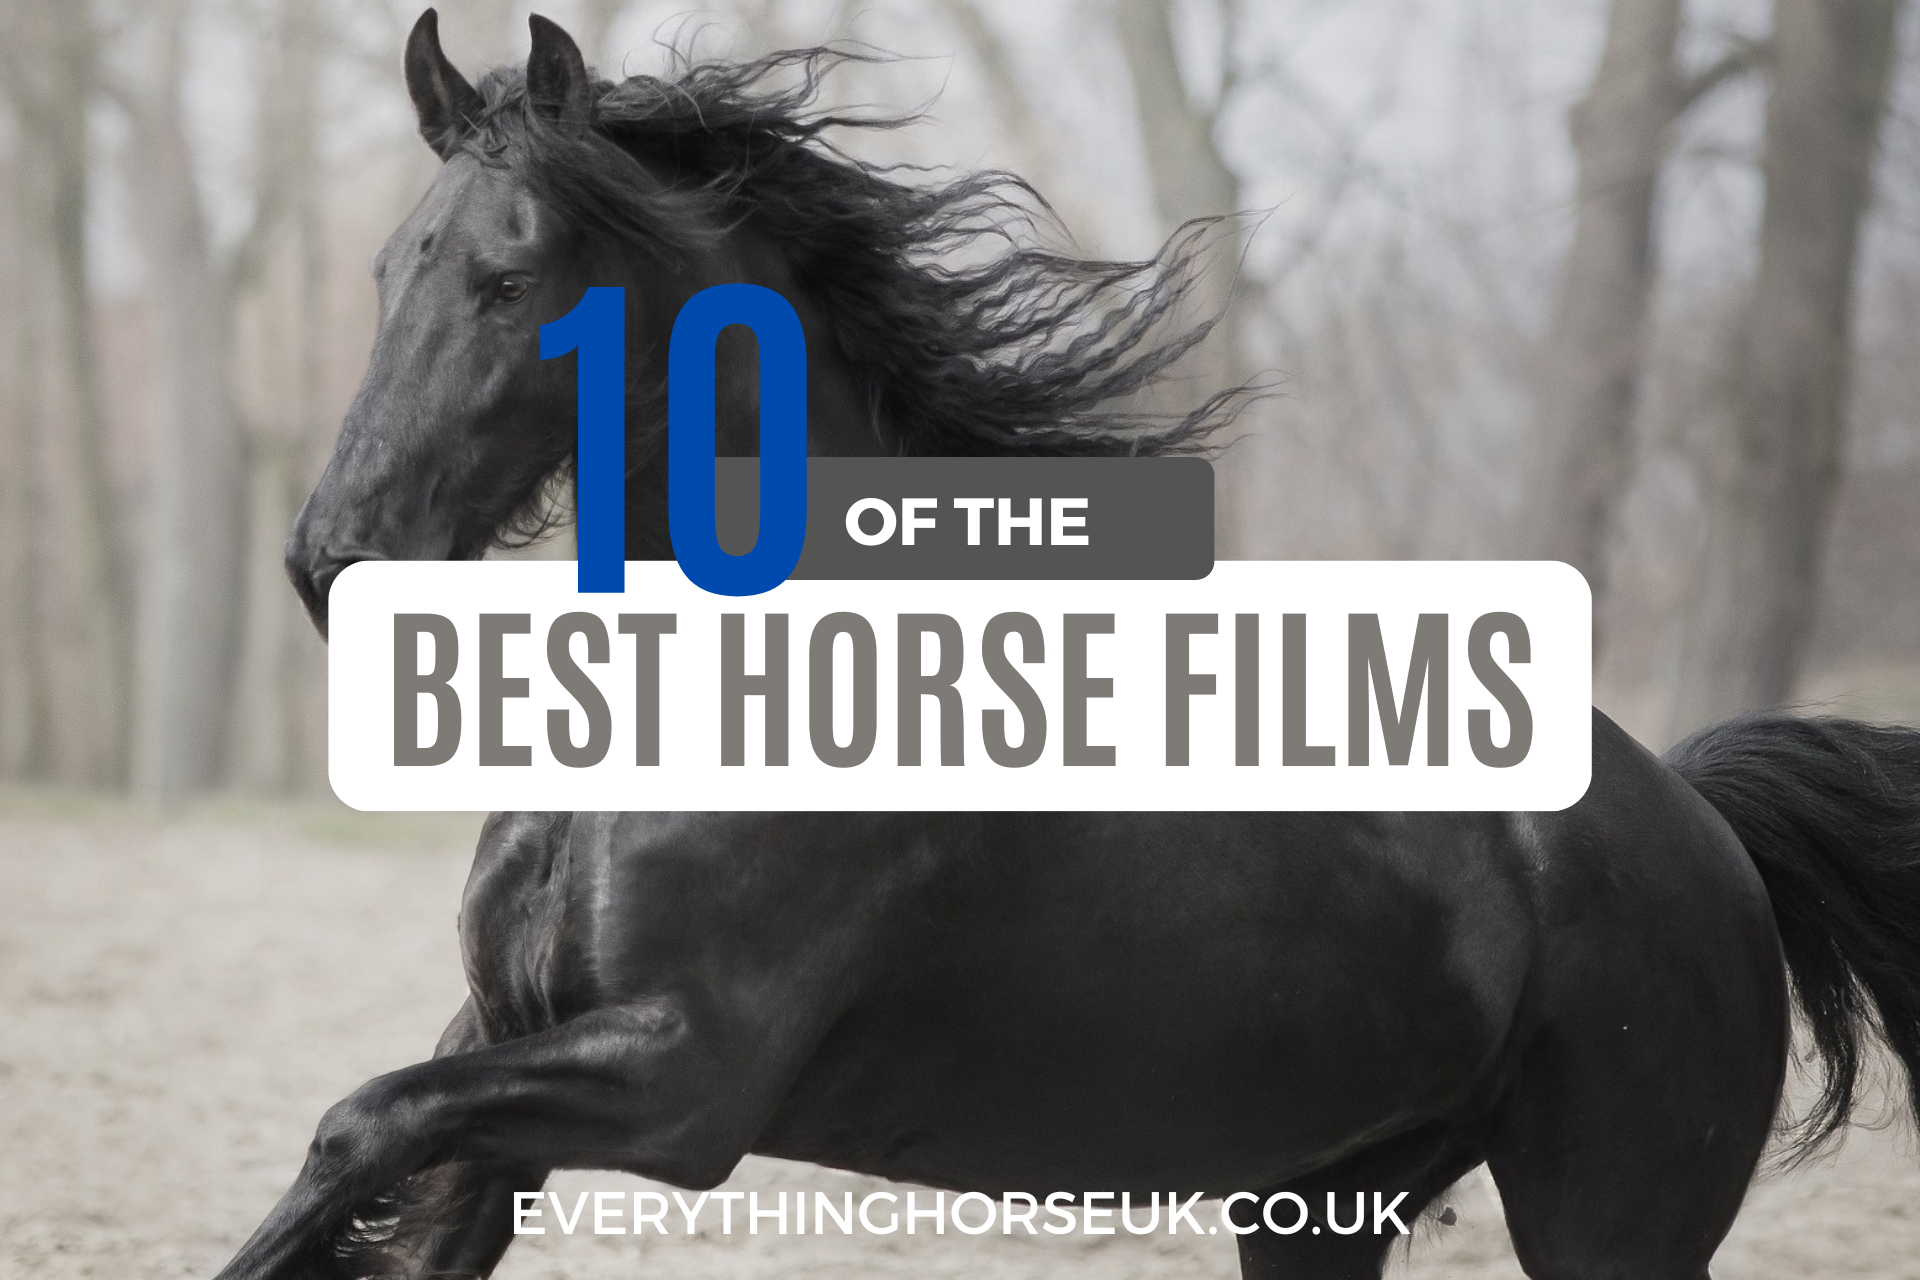 10 of the best horse films